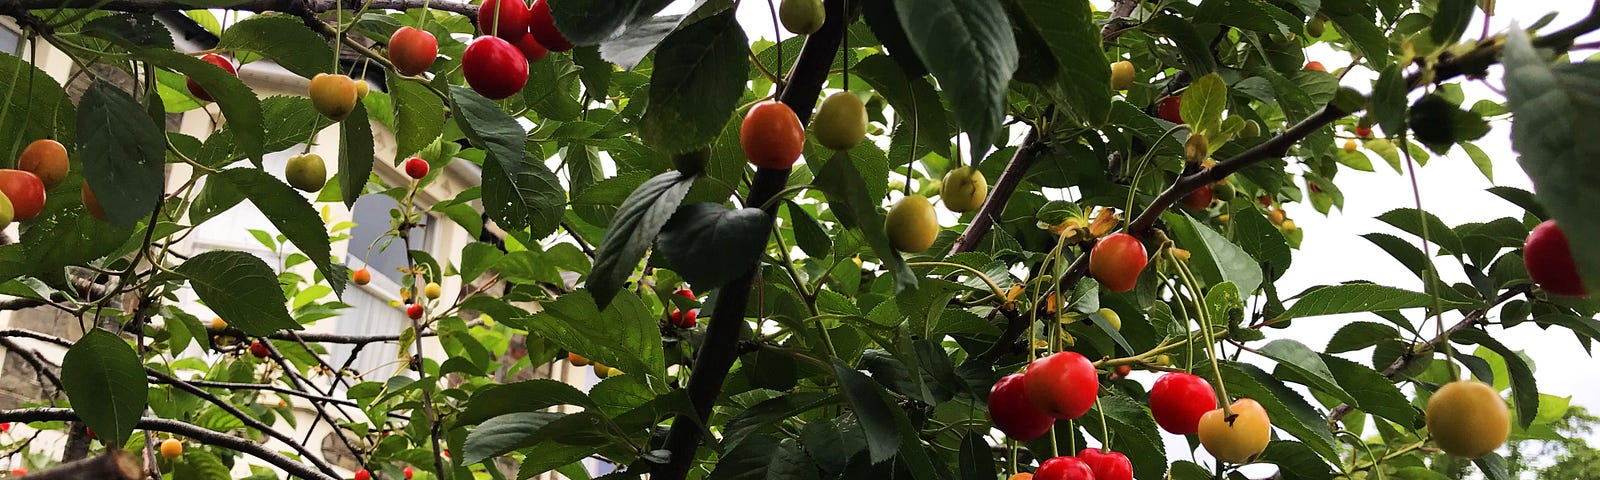 Cherries hanging on a tree.